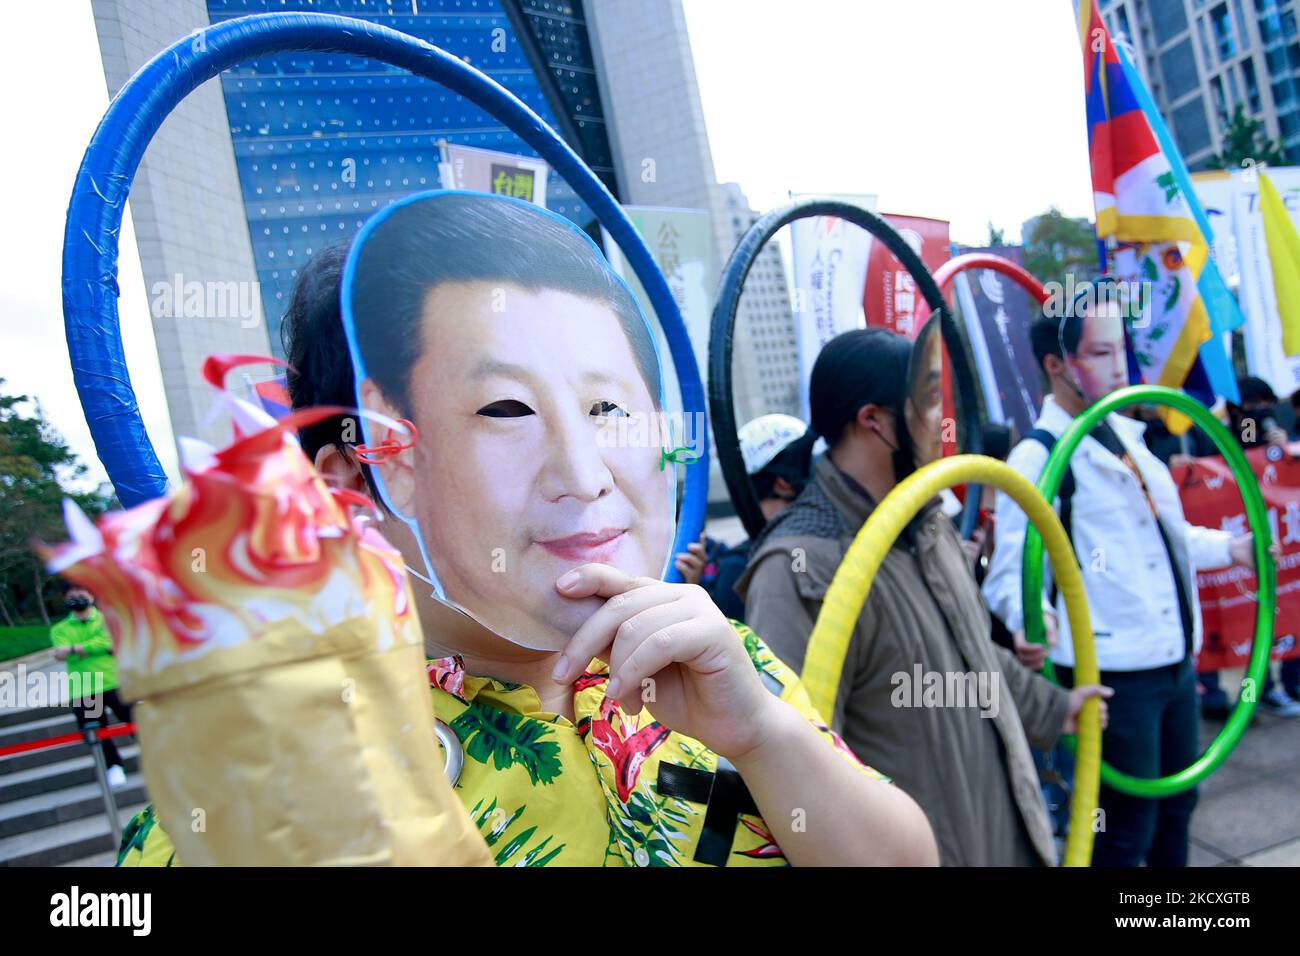 Protesters holding the Olympic Rings, one wearinga mask with the face of Chinese president Xi Jinping, during a protest boycotting the Beijing Winter Games 2022, outside the Bank of China (Taipei Branch), in Taipei, Taiwan, 10 December 2021. The United States, Canada, UK, and Australia have pledged not to send officials to attend the Games as a mean to boycott the China, following the disappearance of Chinese tennis player Peng Shuai and human rights crackdowns on Hong Kong and Xinjiang. (Photo by Ceng Shou Yi/NurPhoto) Stock Photo